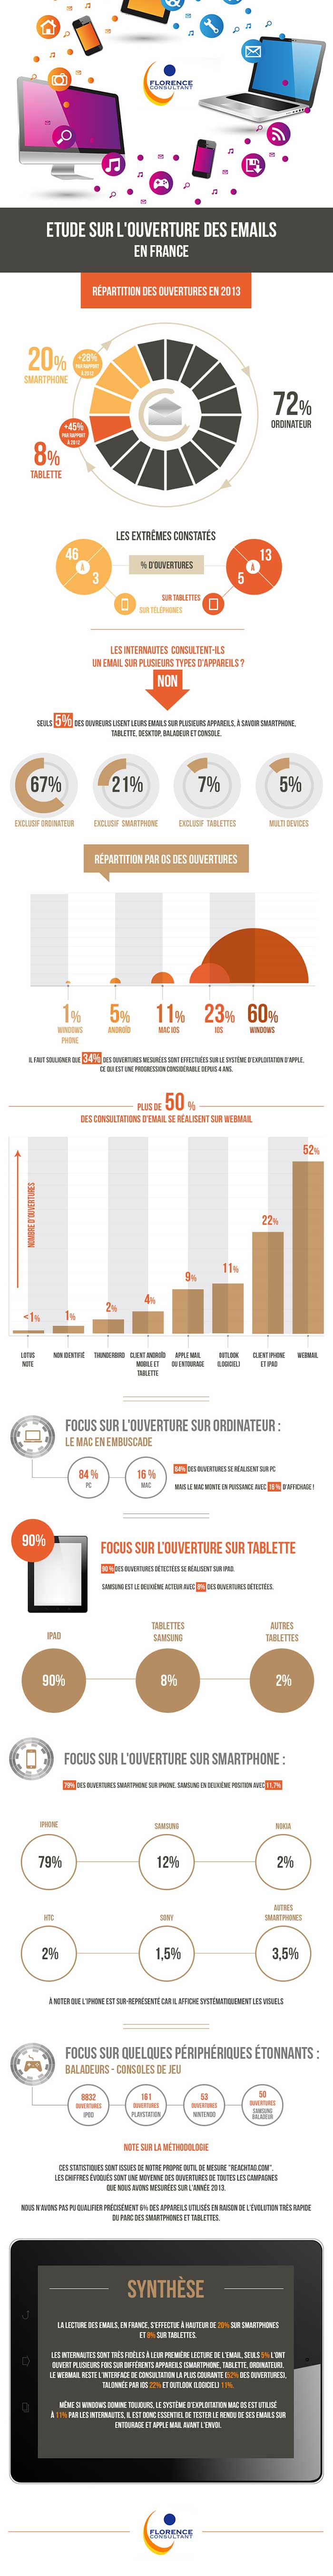 INFOGRAPHIE FLORENCE CONSULTING ETUDE OUVERTURE EMAILS EN FRANCE